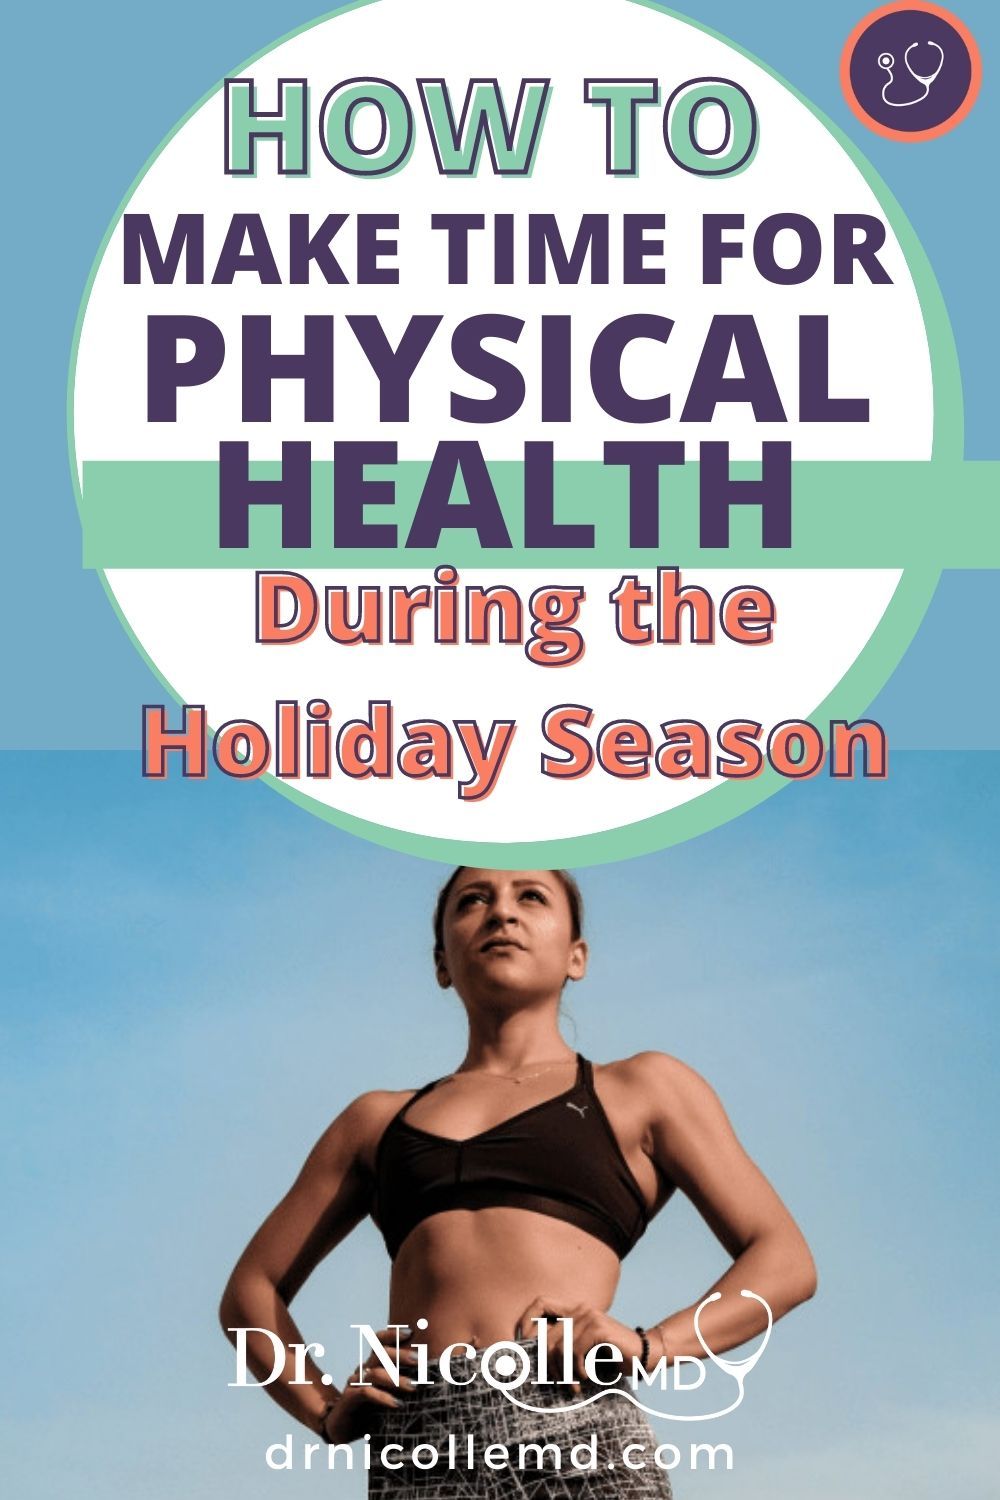 How to Make Time for Physical Health During the Holiday Season